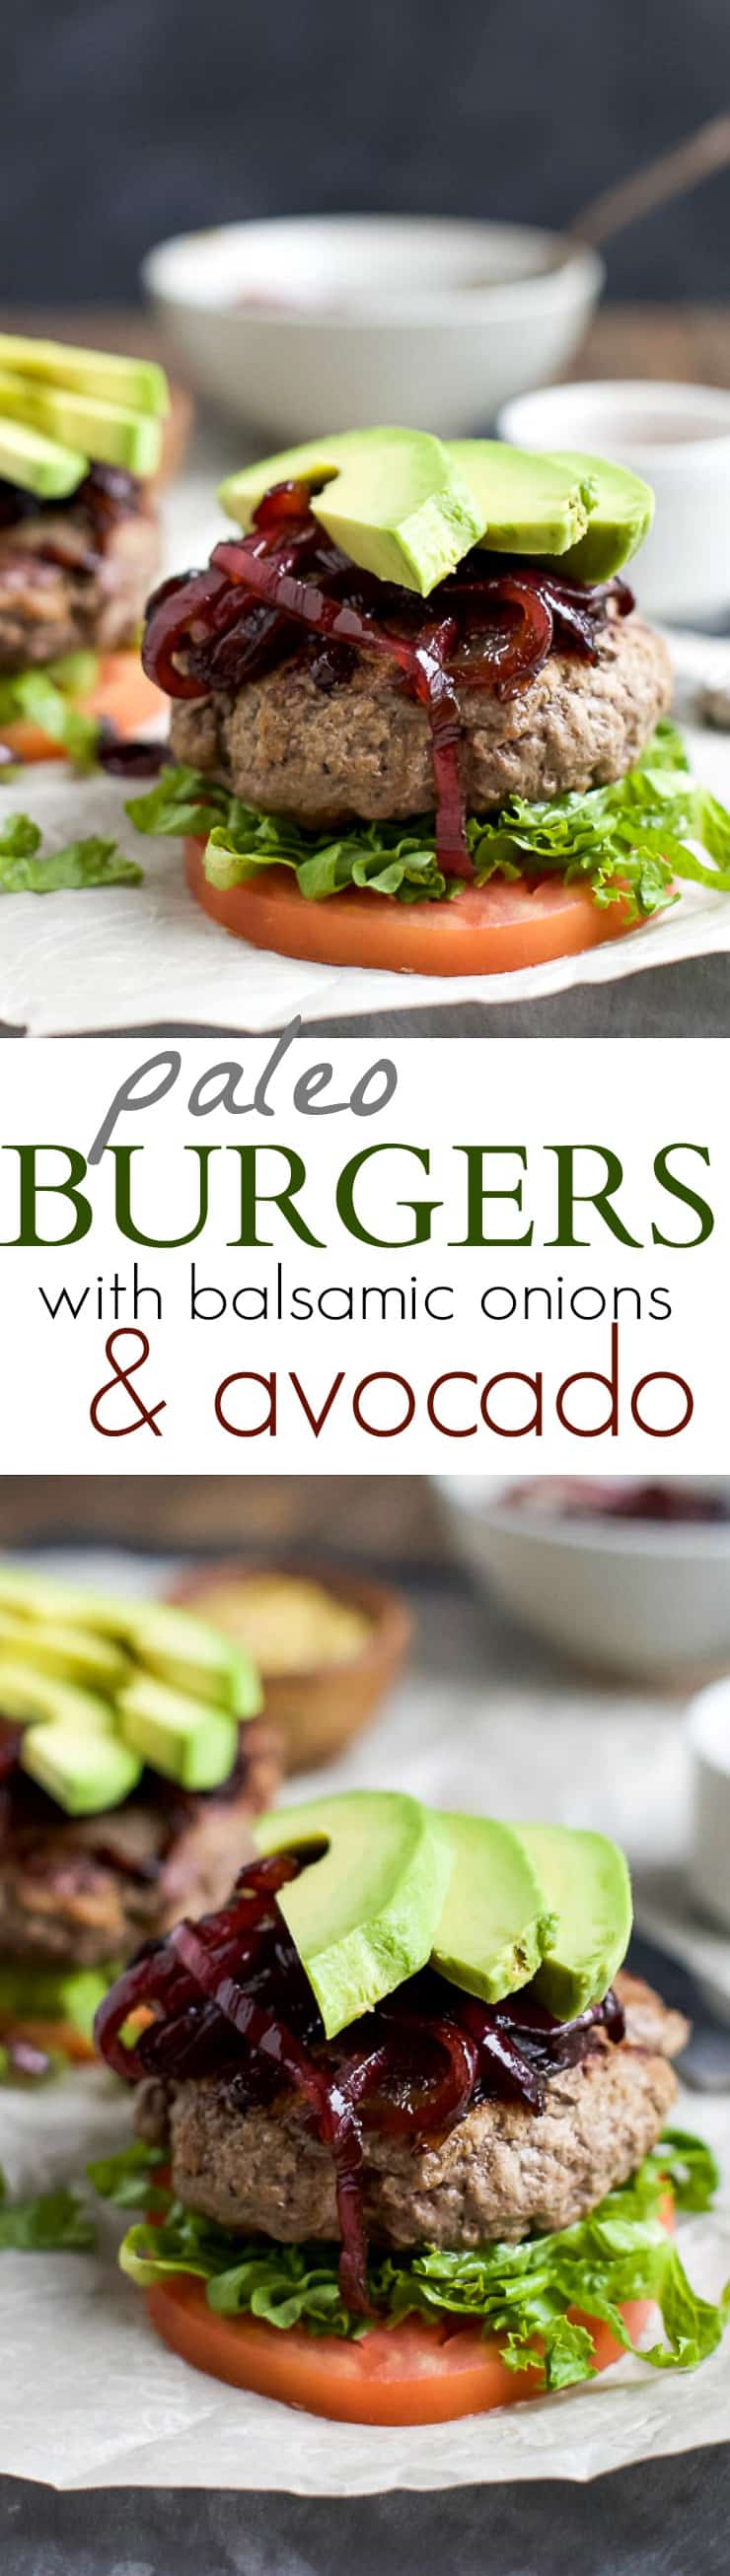 Title Image for Paleo Burgers with Caramelized Balsamic Onions